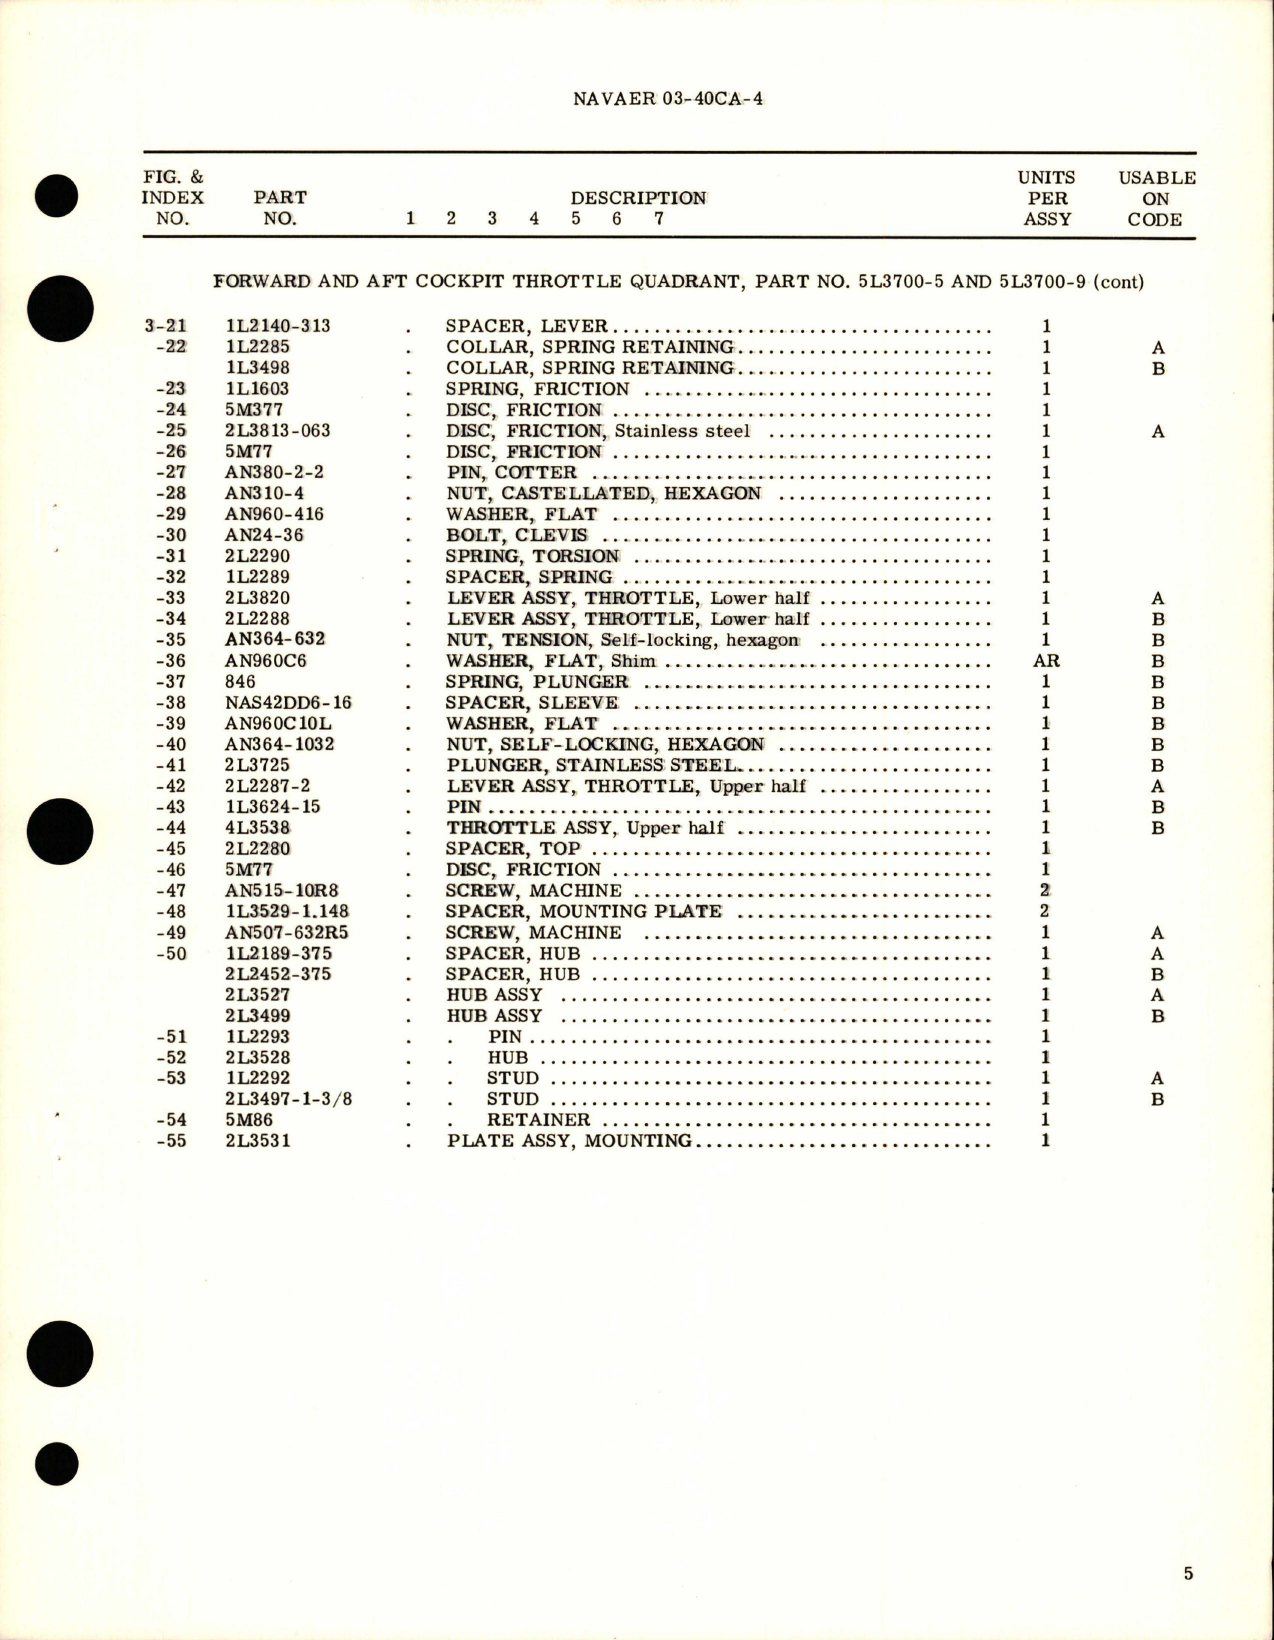 Sample page 5 from AirCorps Library document: Overhaul Instructions with Parts for Cockpit Throttle Quadrant - Parts 5L3700-5 and 5L3700-9